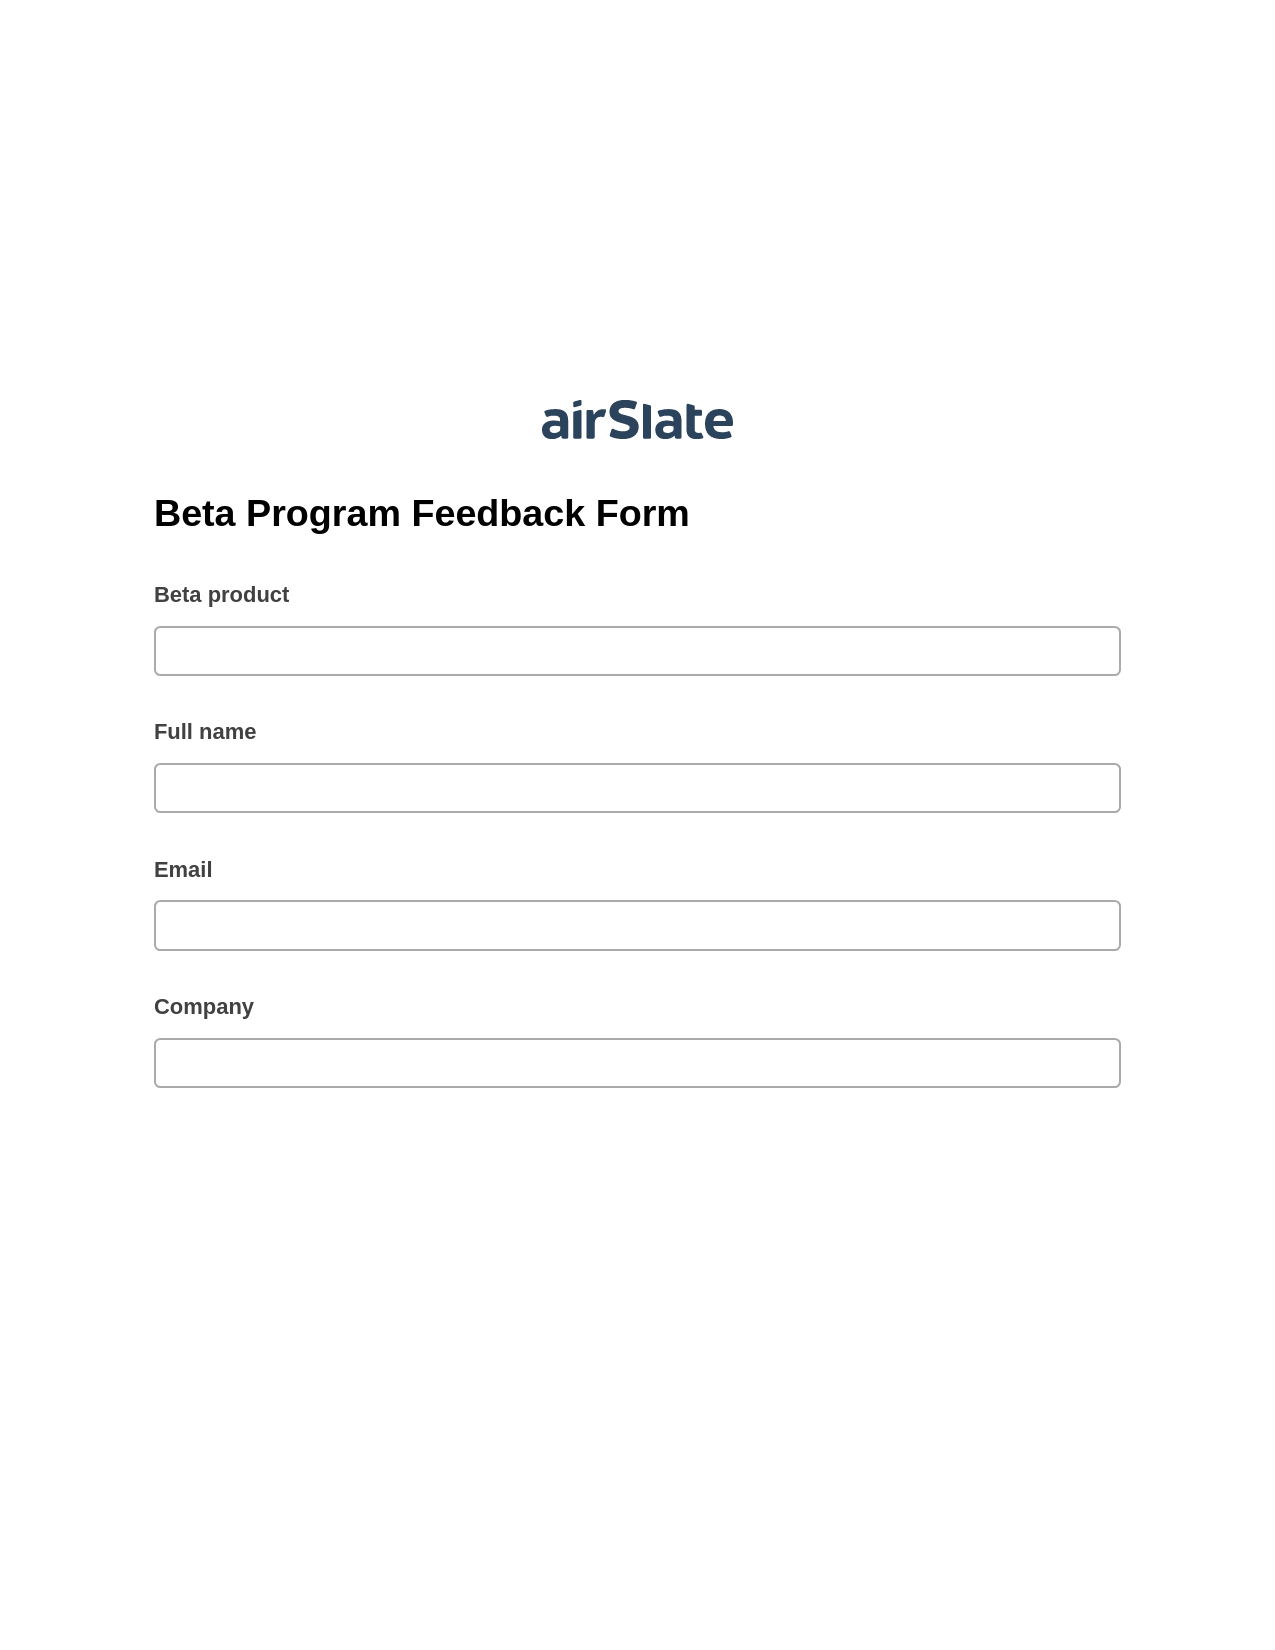 Multirole Beta Program Feedback Form Pre-fill Dropdown from Airtable, Reminder Bot, Export to Excel 365 Bot